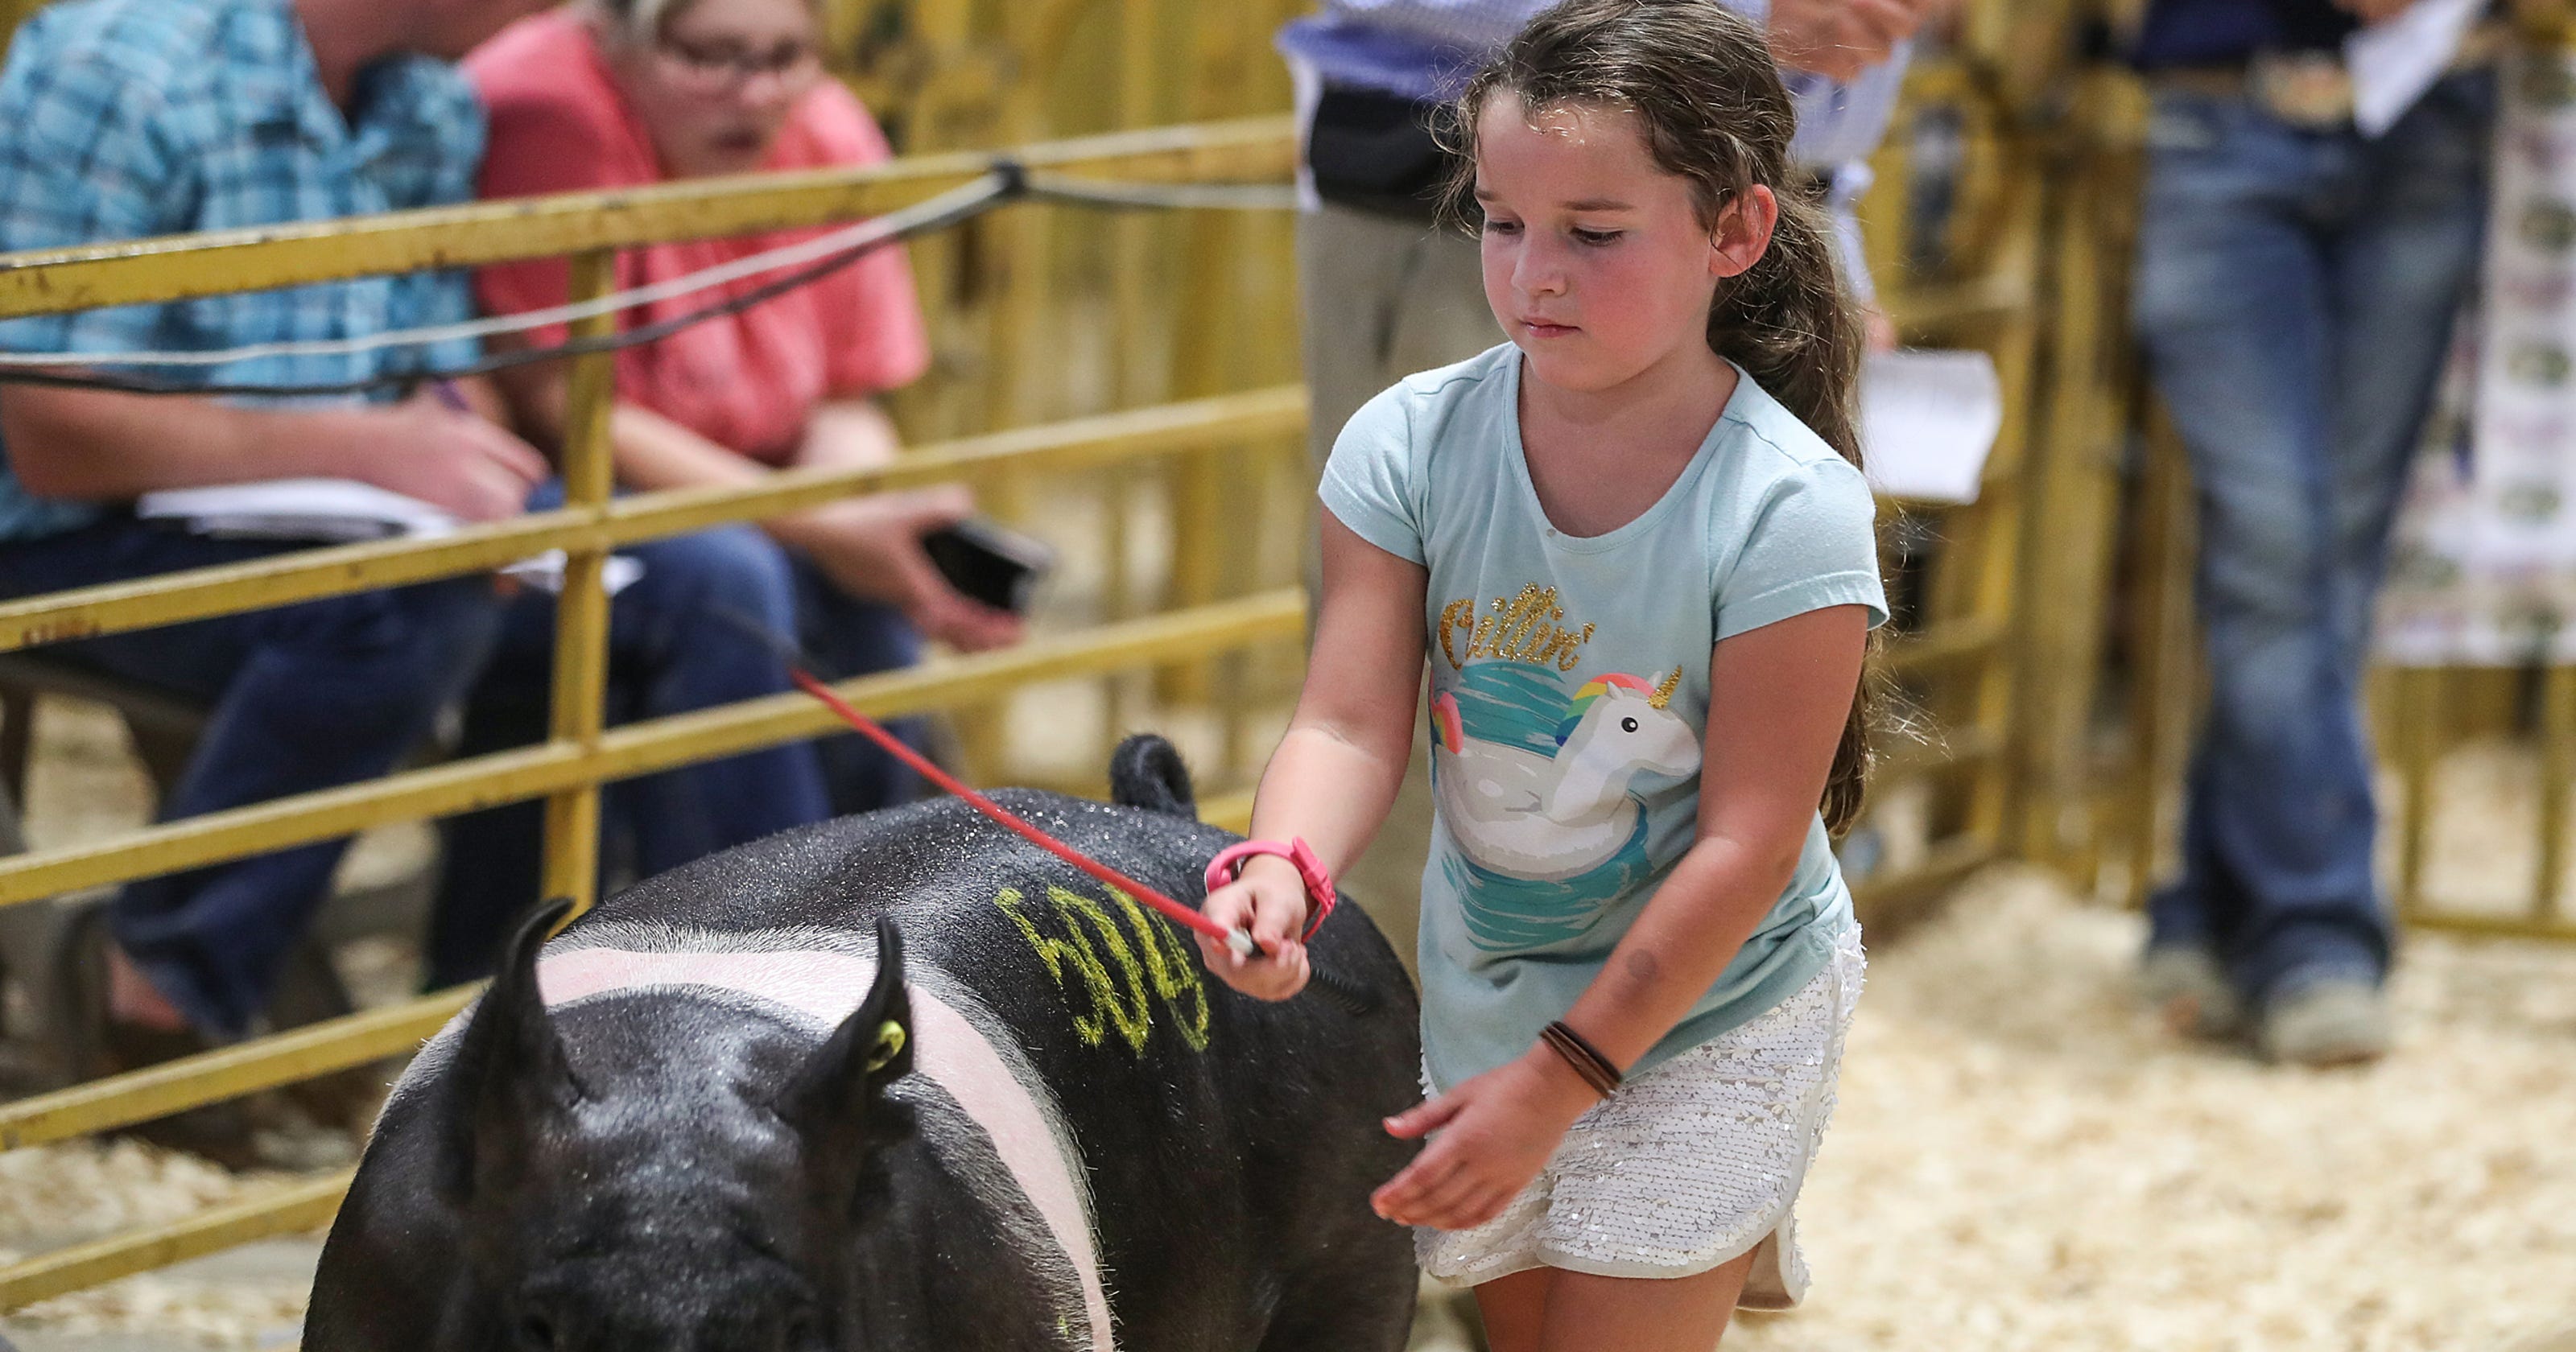 Indiana State Fair 2019: Dates, ticket prices, concerts and more